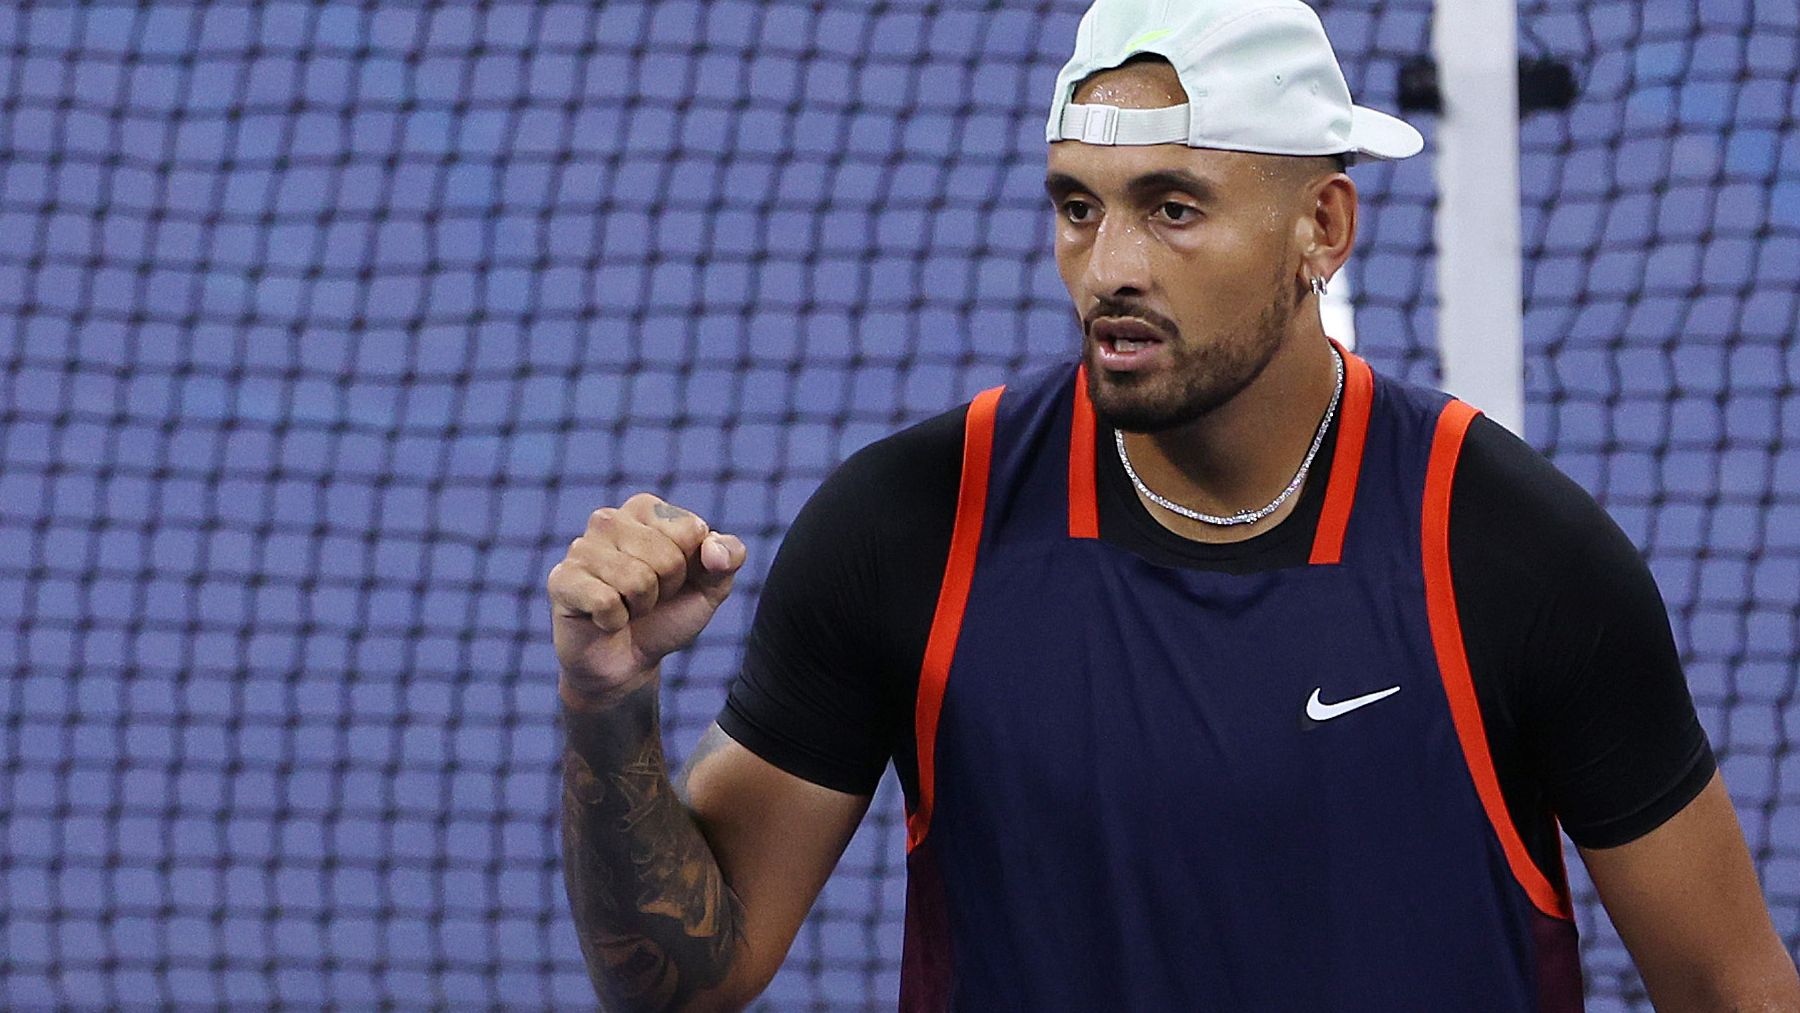 Nick Kyrgios of Australia celebrates after defeating J.J. Wolf of the United States during their Men&#x27;s Singles Third Round match on Day Five of the 2022 US Open at USTA Billie Jean King National Tennis Center on September 02, 2022 in the Flushing neighborhood of the Queens borough of New York City. (Photo by Jamie Squire/Getty Images)